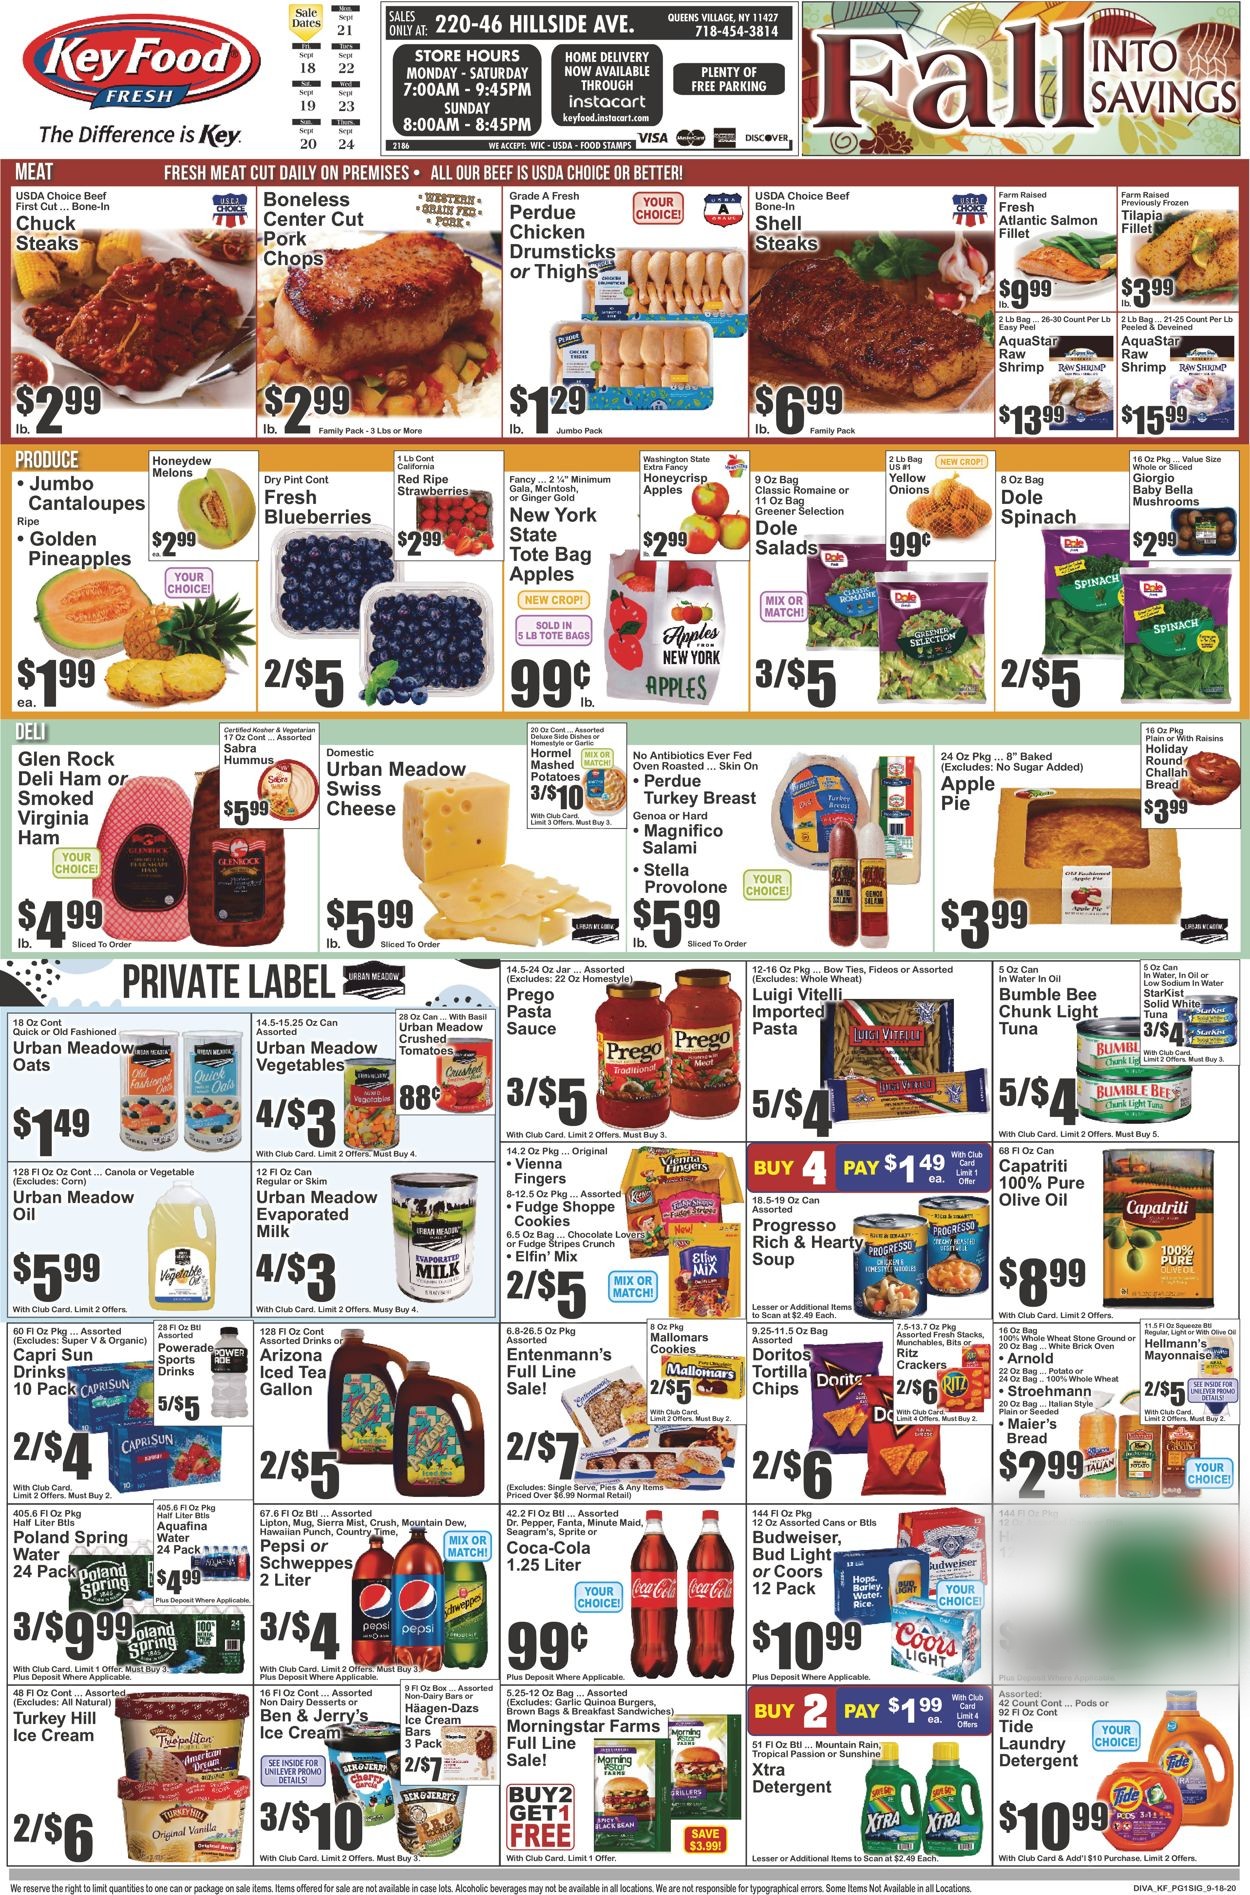 Key Food Current weekly ad 09/18 - 09/24/2020 - frequent-ads.com